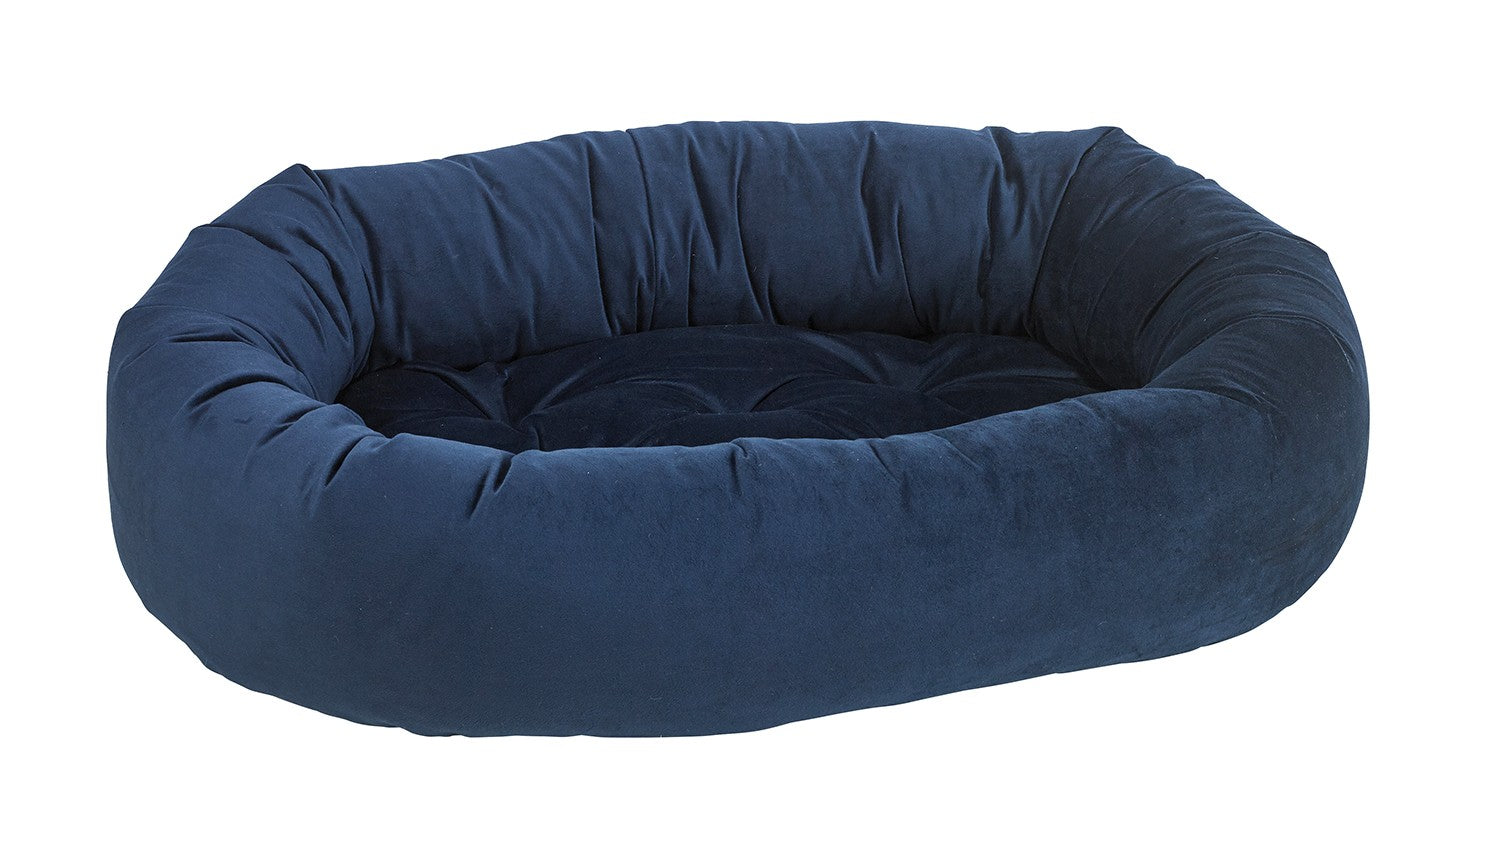 Pet Bed- Solid Navy Color Microvelvet Donut Bed - A Pet's World